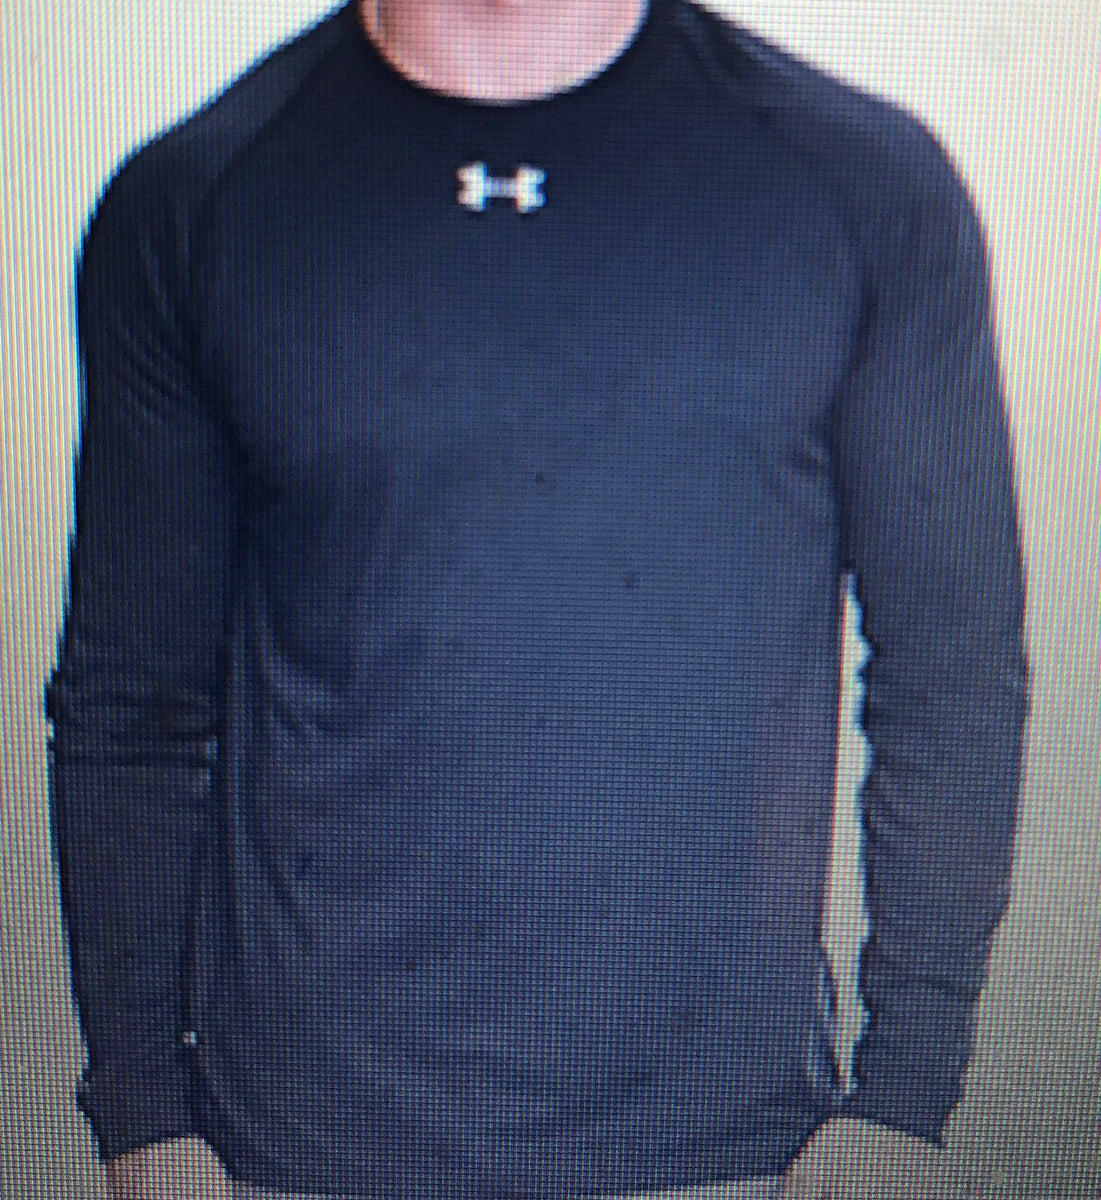 Under Armour Long Sleeve Dry Fit Shirt with B2L logo (Please include n